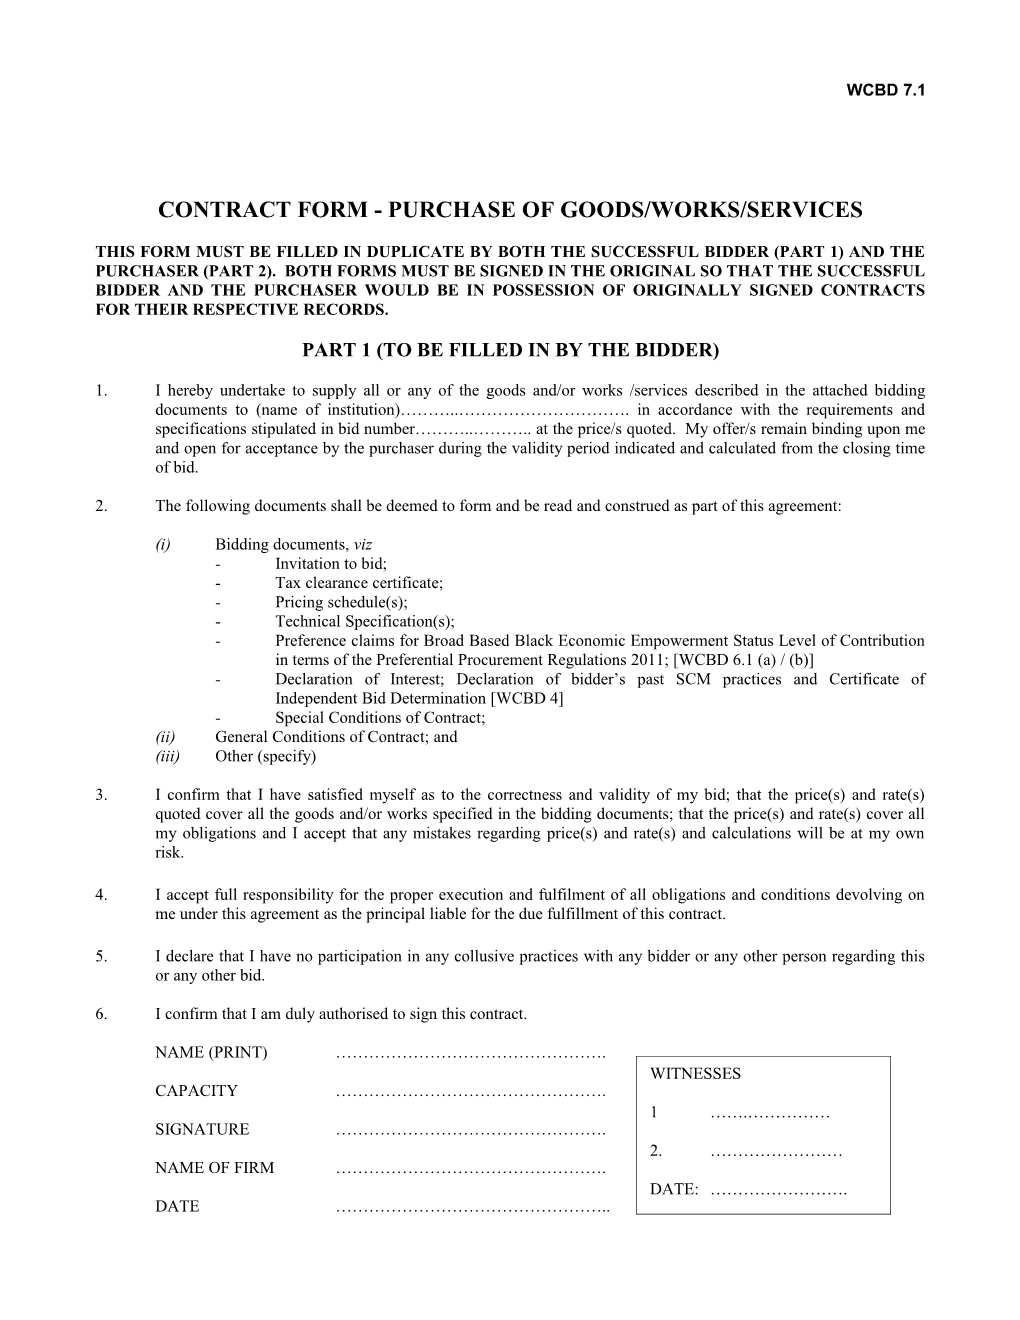 Contract Form - Purchase of Goods/Works/Services